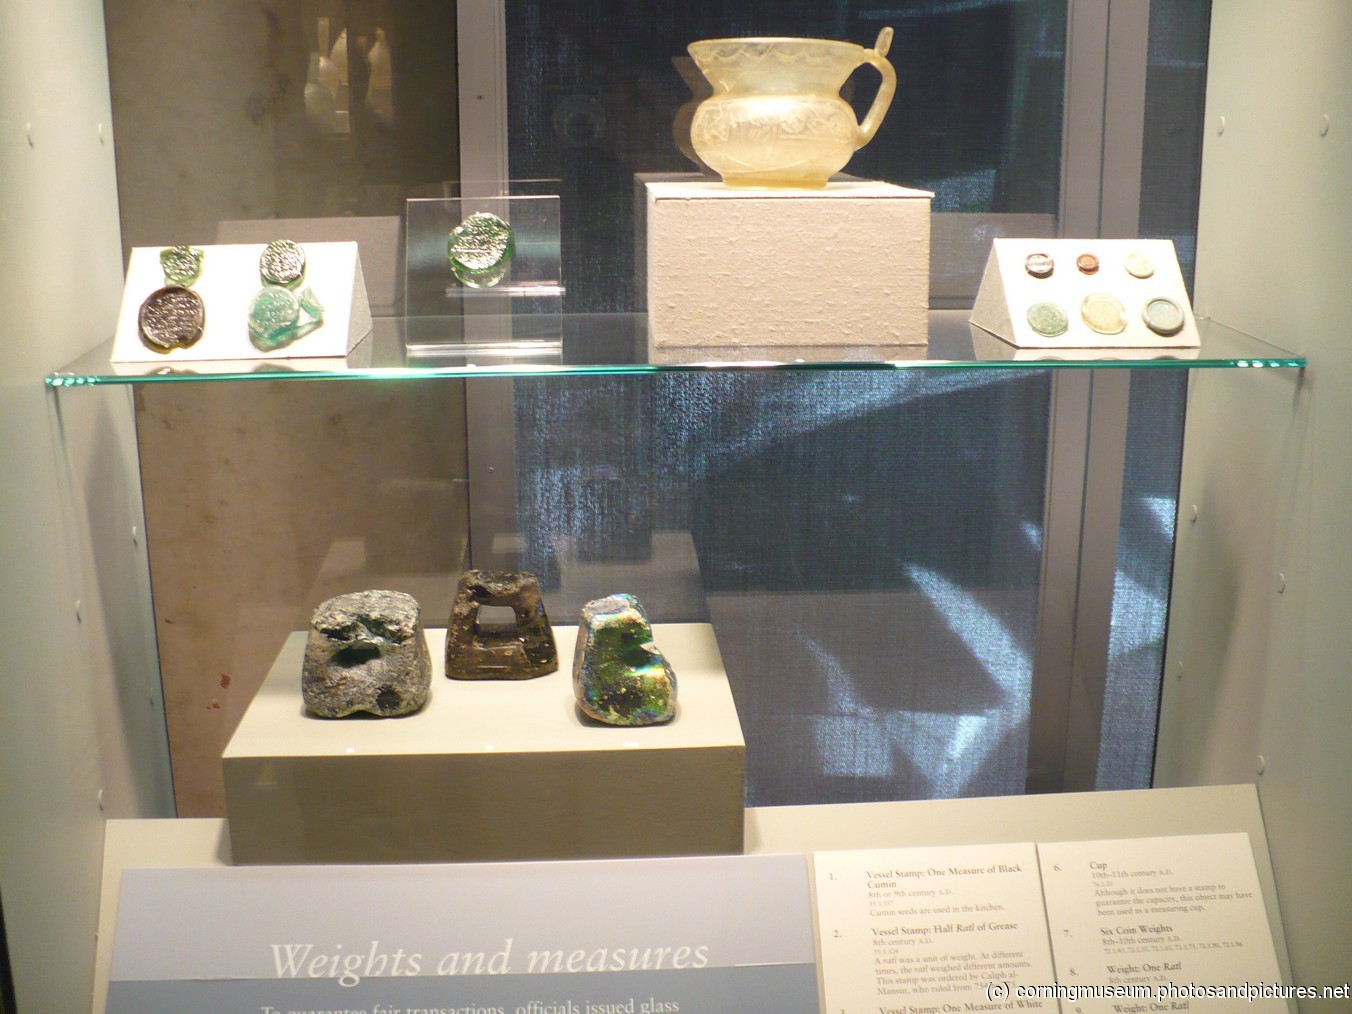 Weights and Measures display at Corning Museum of Glass.jpg
